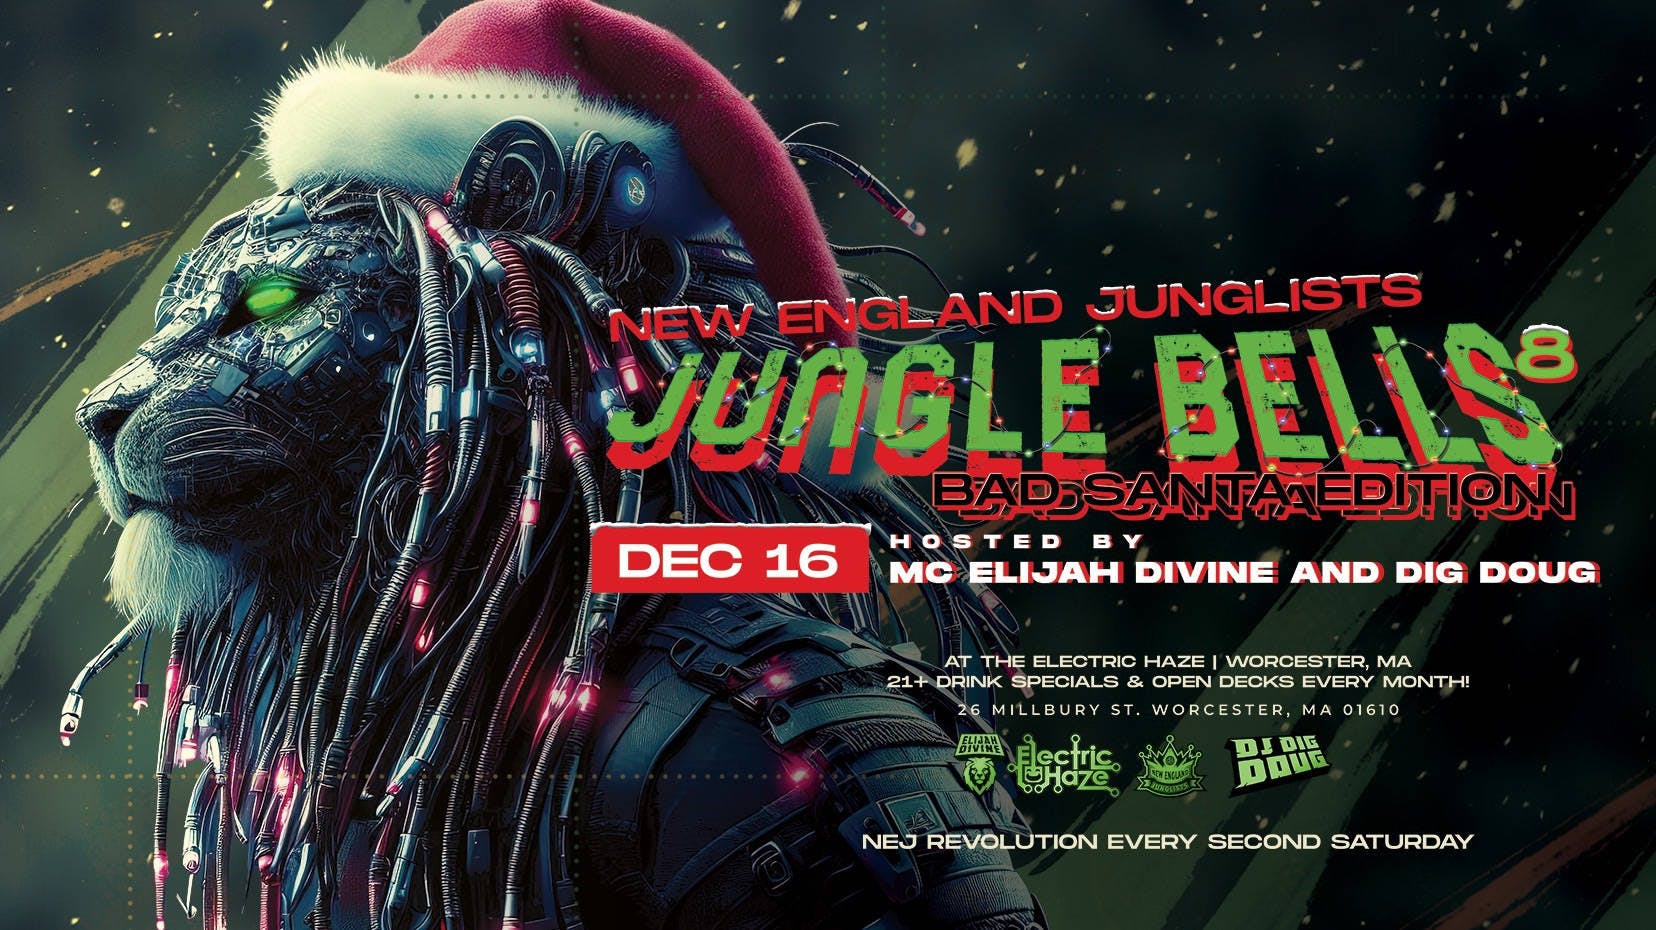 NEJ's Jungle Bells 8 (Bad Santa Edition) in Worcester at Electric